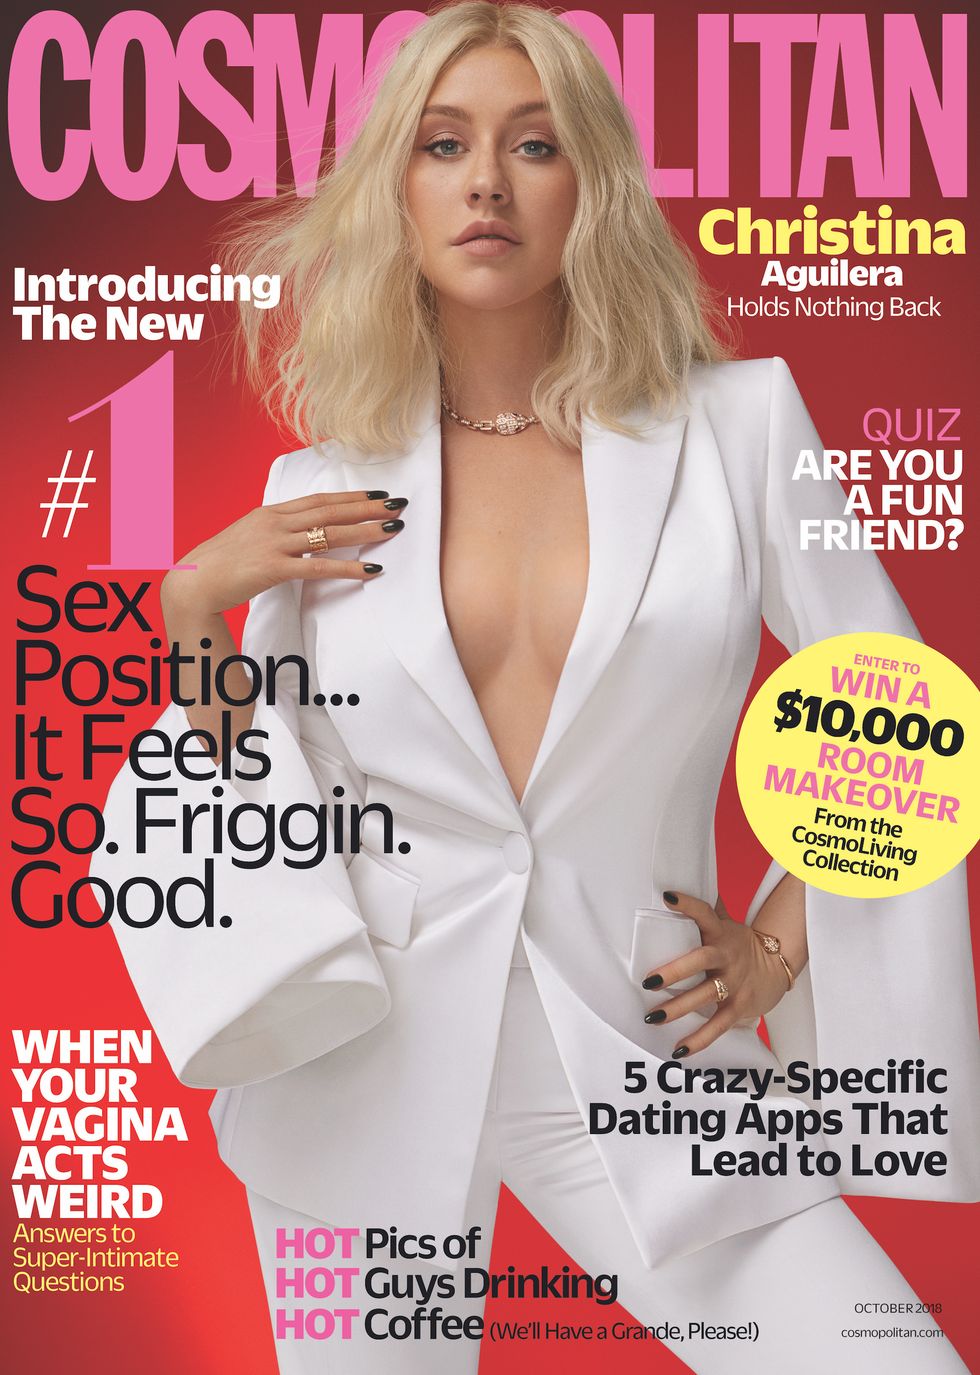 Christina Aguilera on the cover of Cosmopolitan's October issue